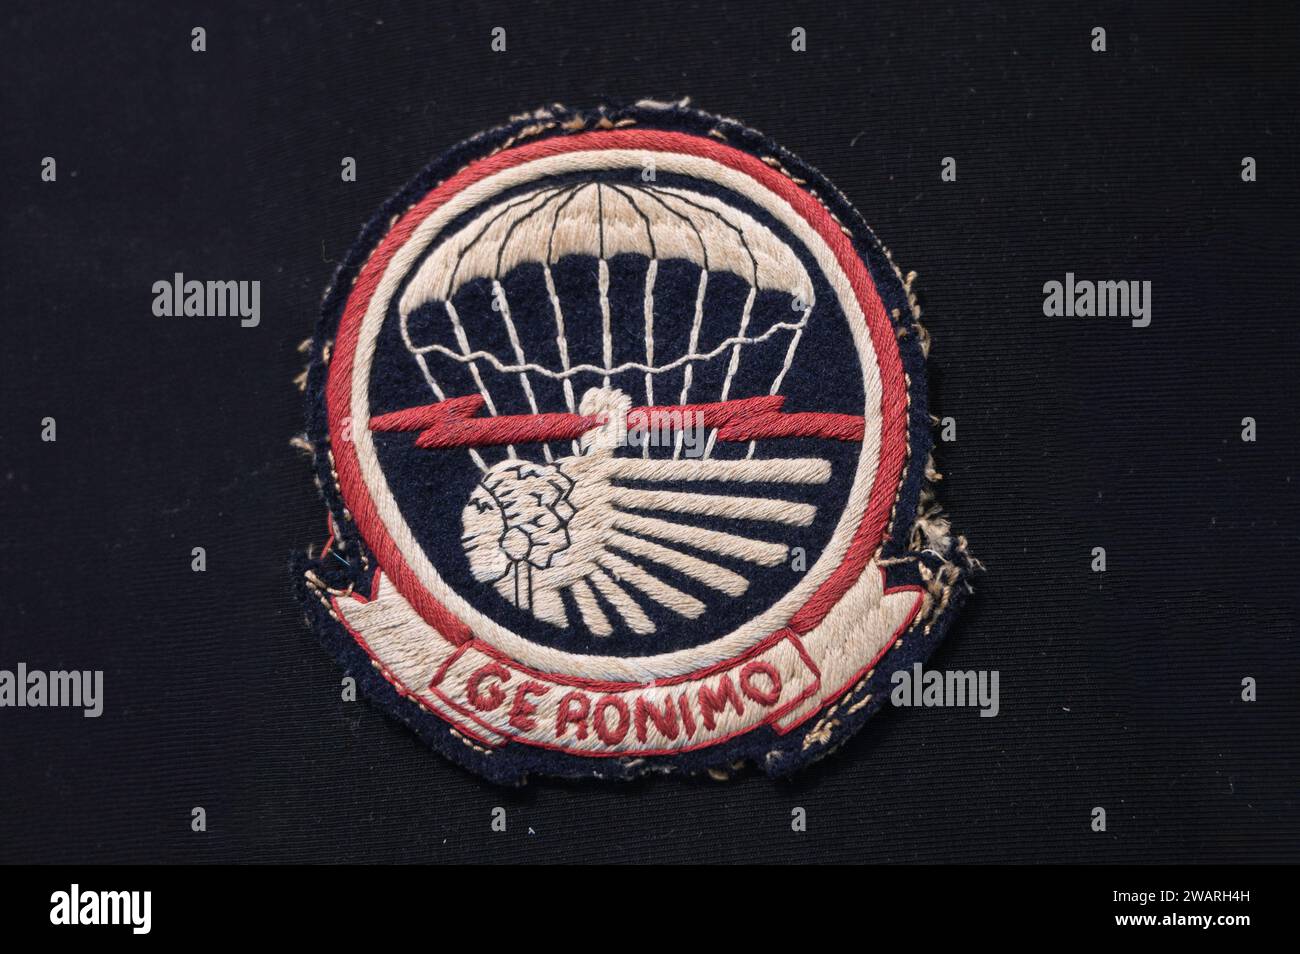 US WWII 501st Parachute Infantry Regiment Shoulder Patch - Geronimo on Black Background Stock Photo